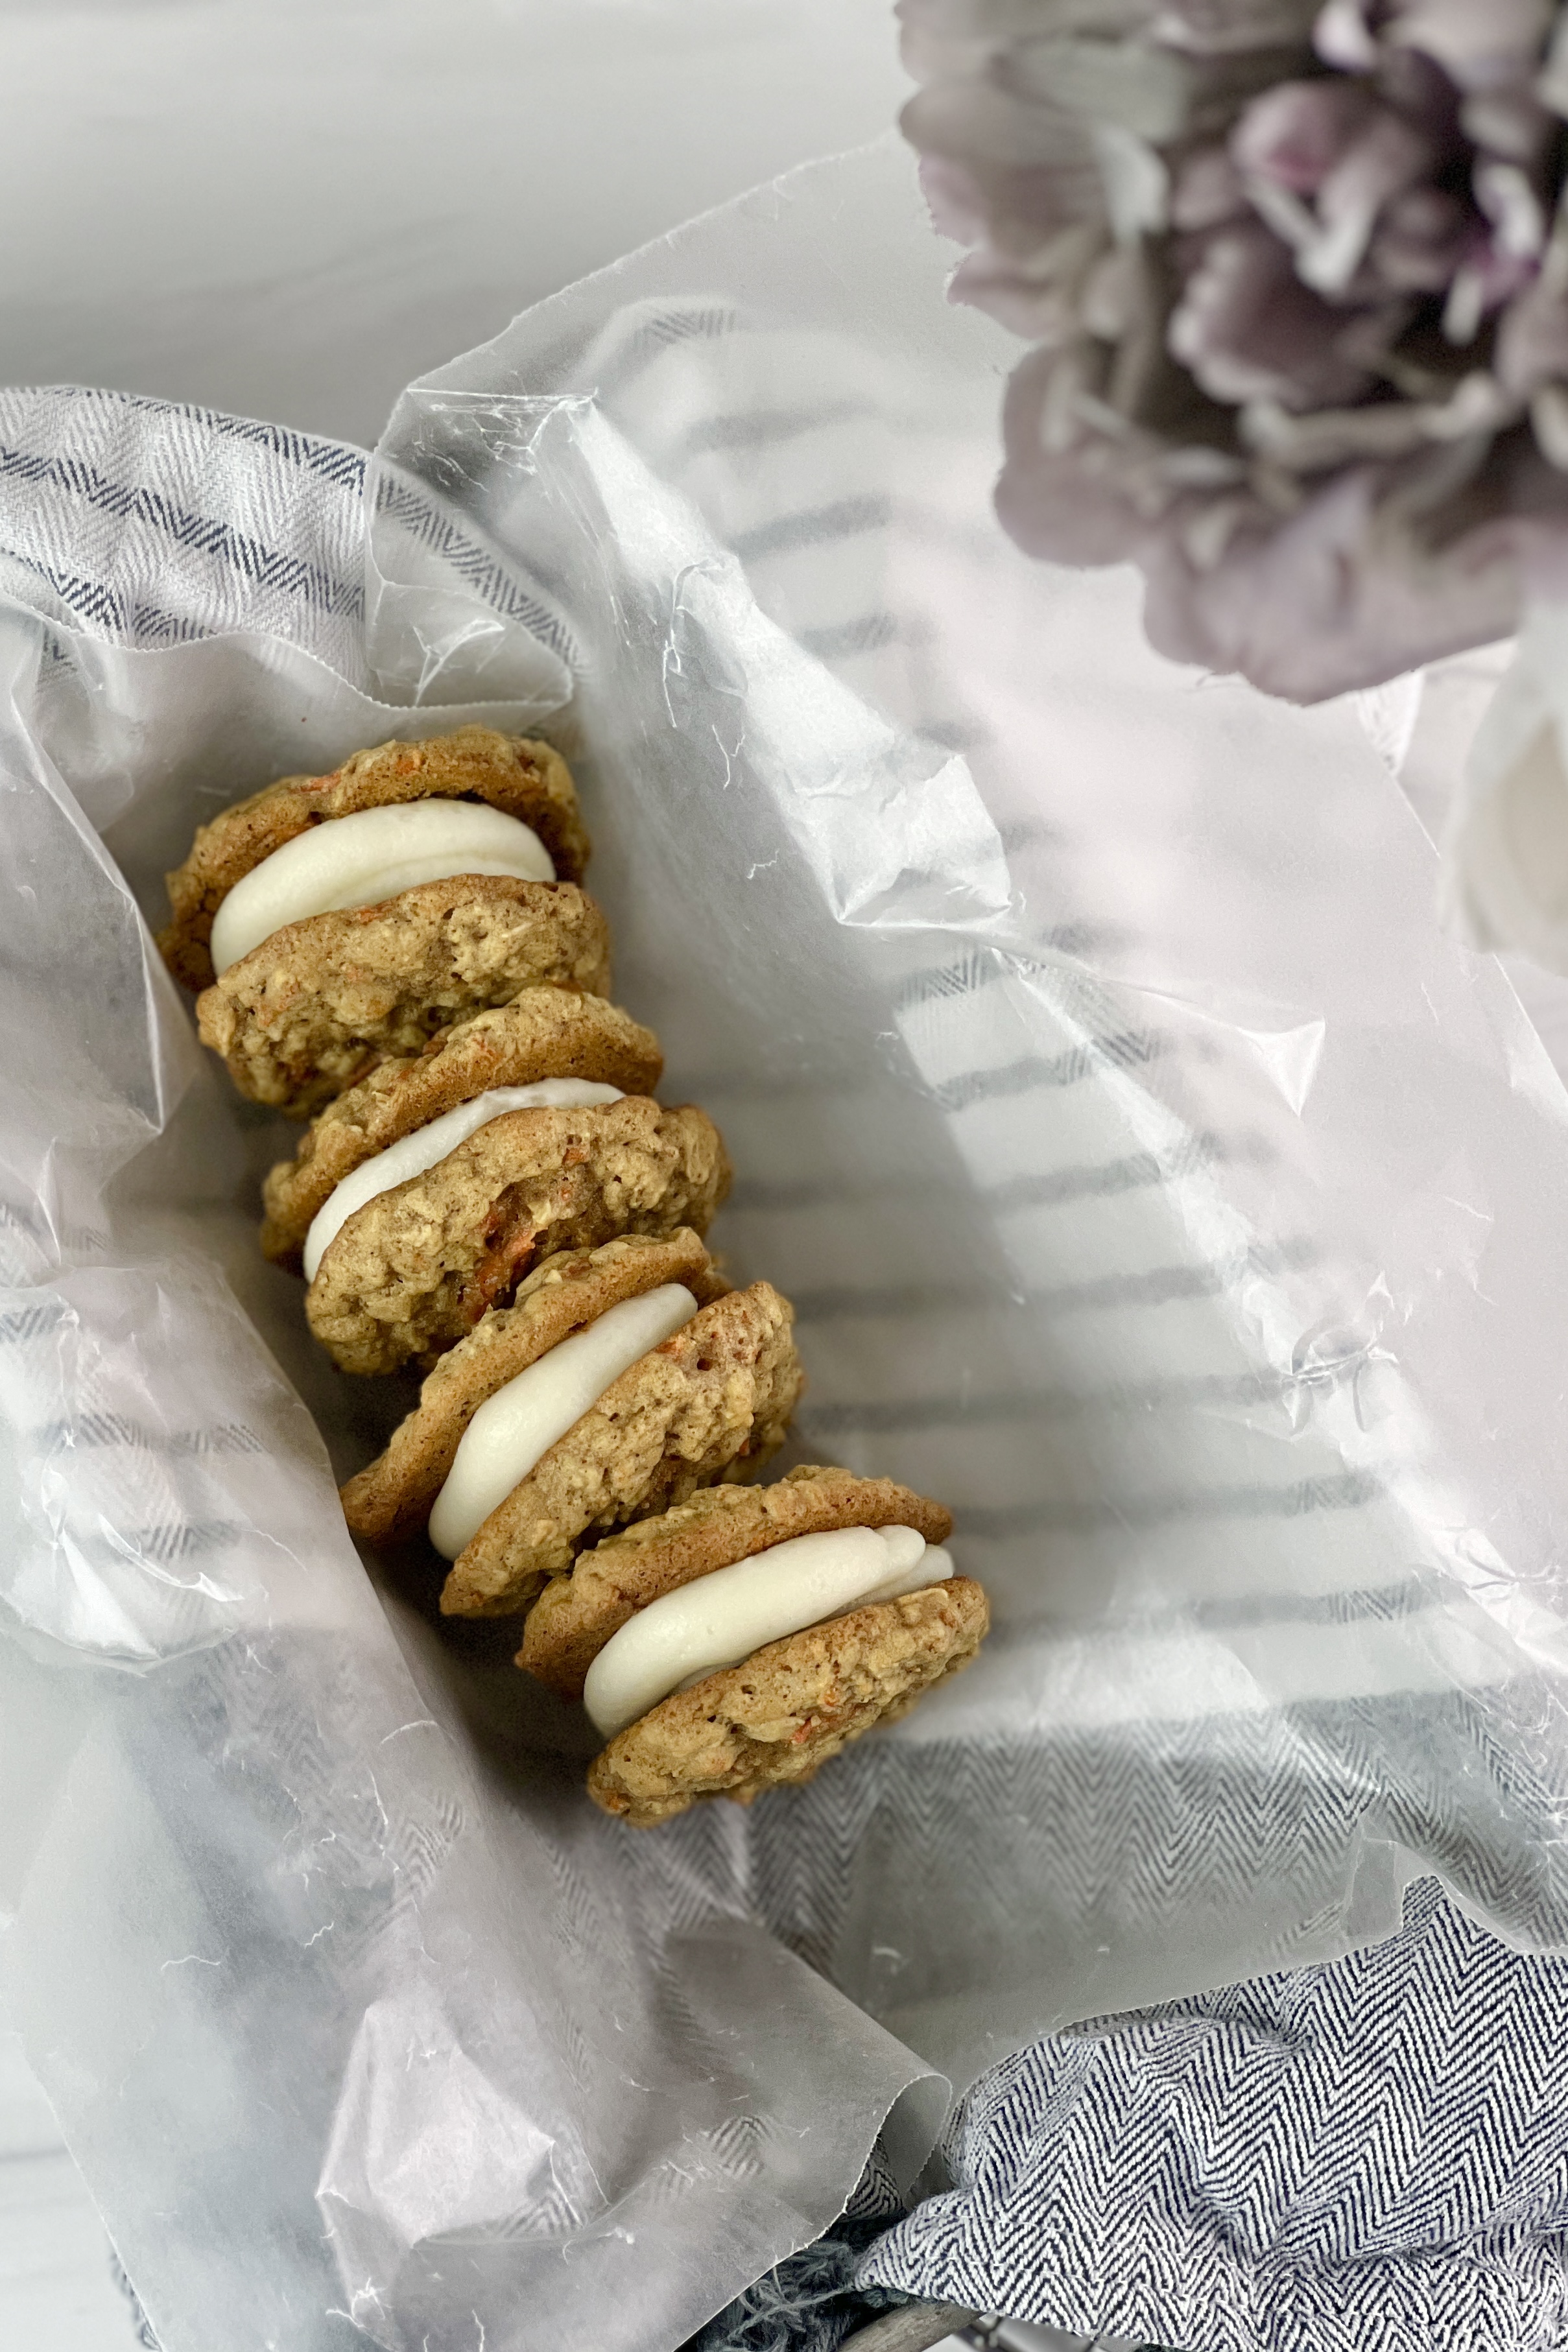 These soft and chewy carrot cake sandwich cookies filled with cream cheese frosting are delicious and easy to make. 